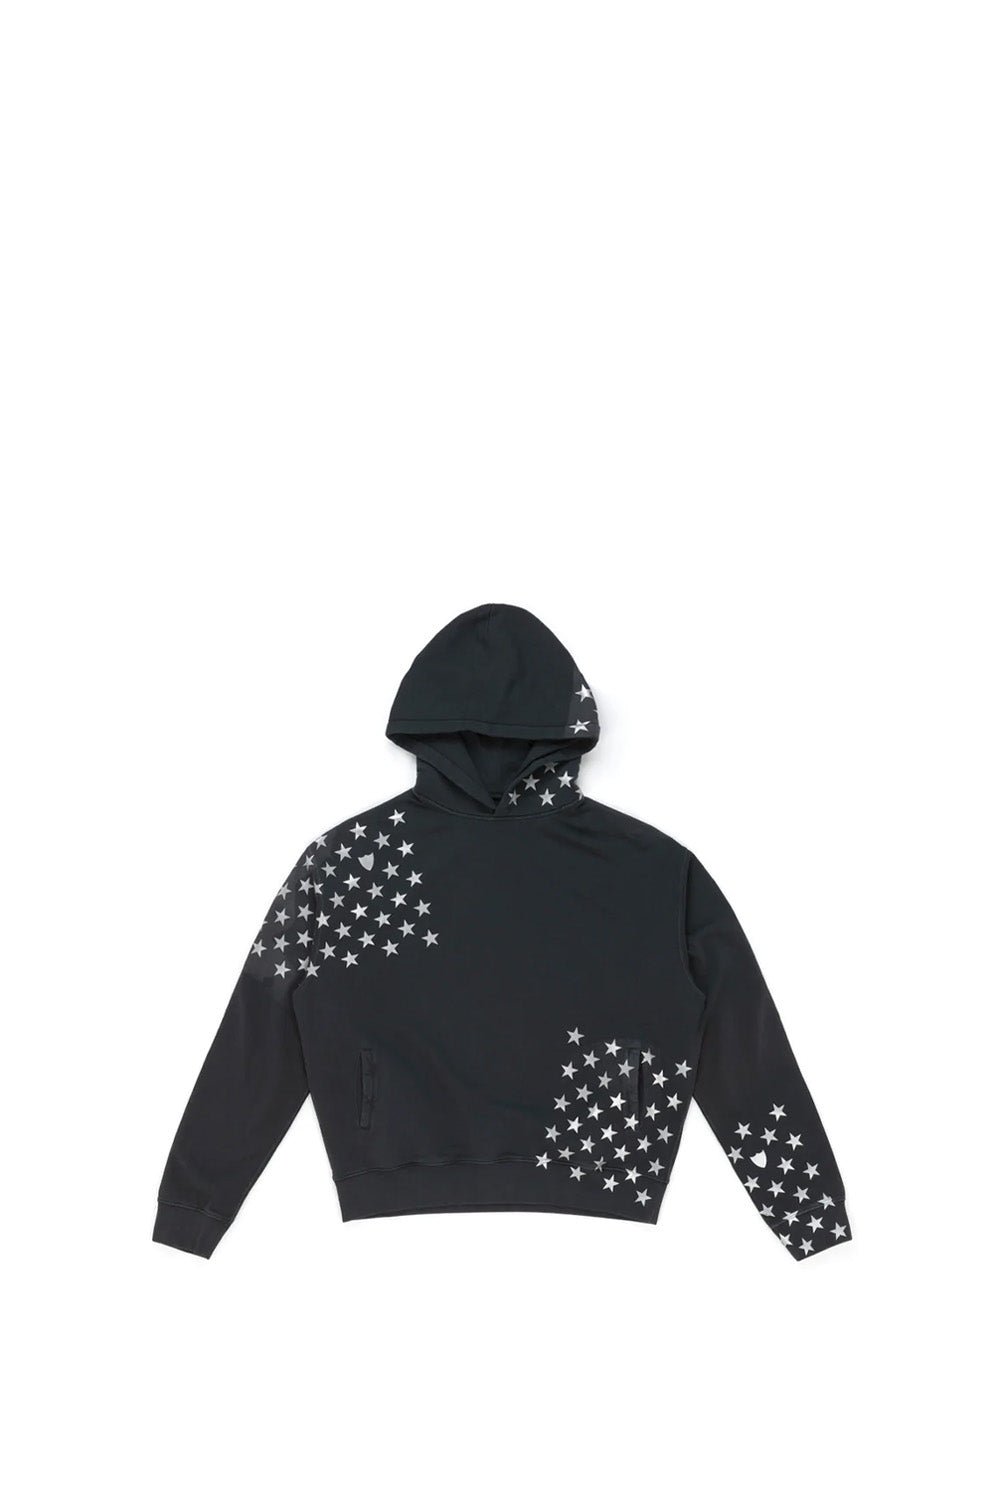 STARS HOODIE Hooded sweater printed on the front. Regular fit. Intentionally broken areas. 100% Cotton. HTC LOS ANGELES